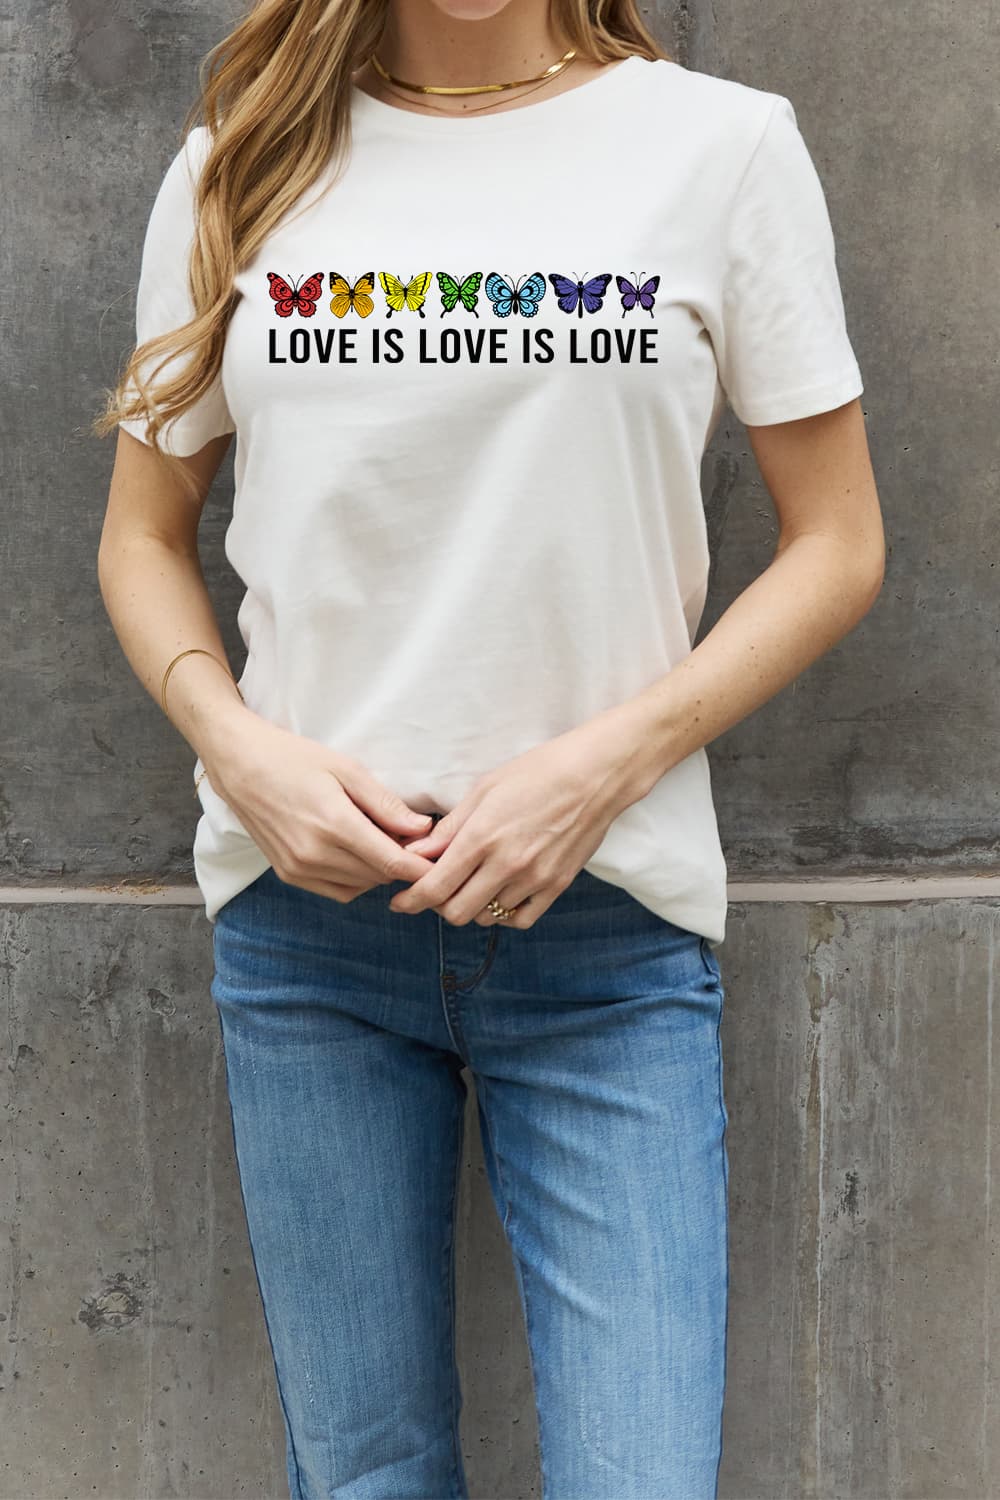 Simply Love Full Size LOVE IS LOVE IS LOVE Graphic Cotton Tee